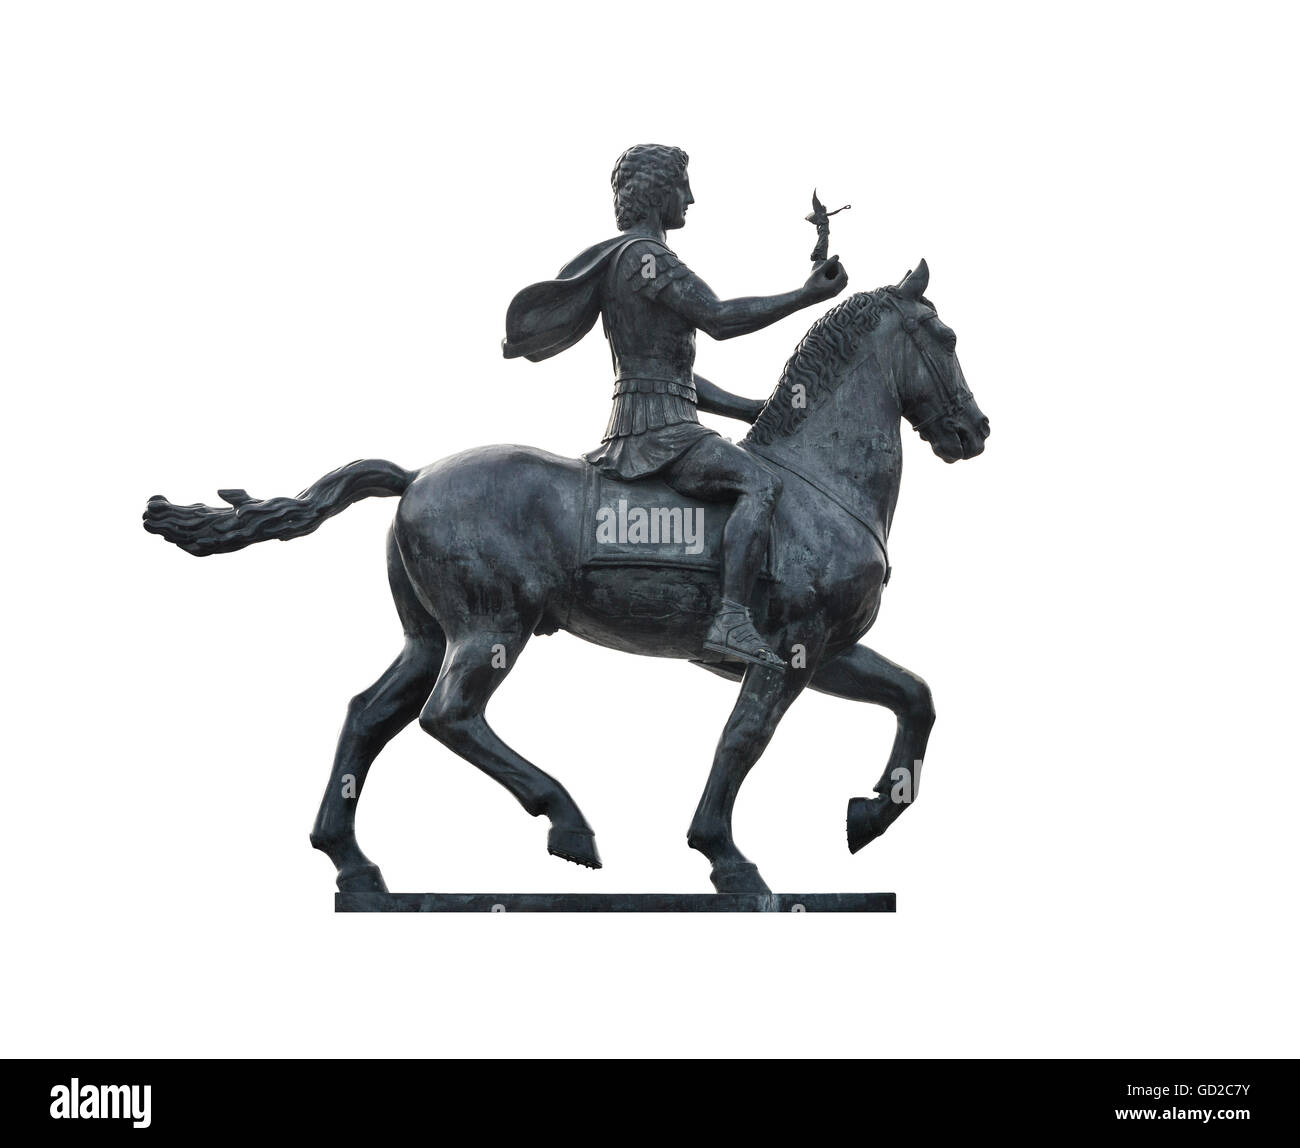 Statue of Alexander The Great Riding on Horse Isolated on White Background Stock Photo